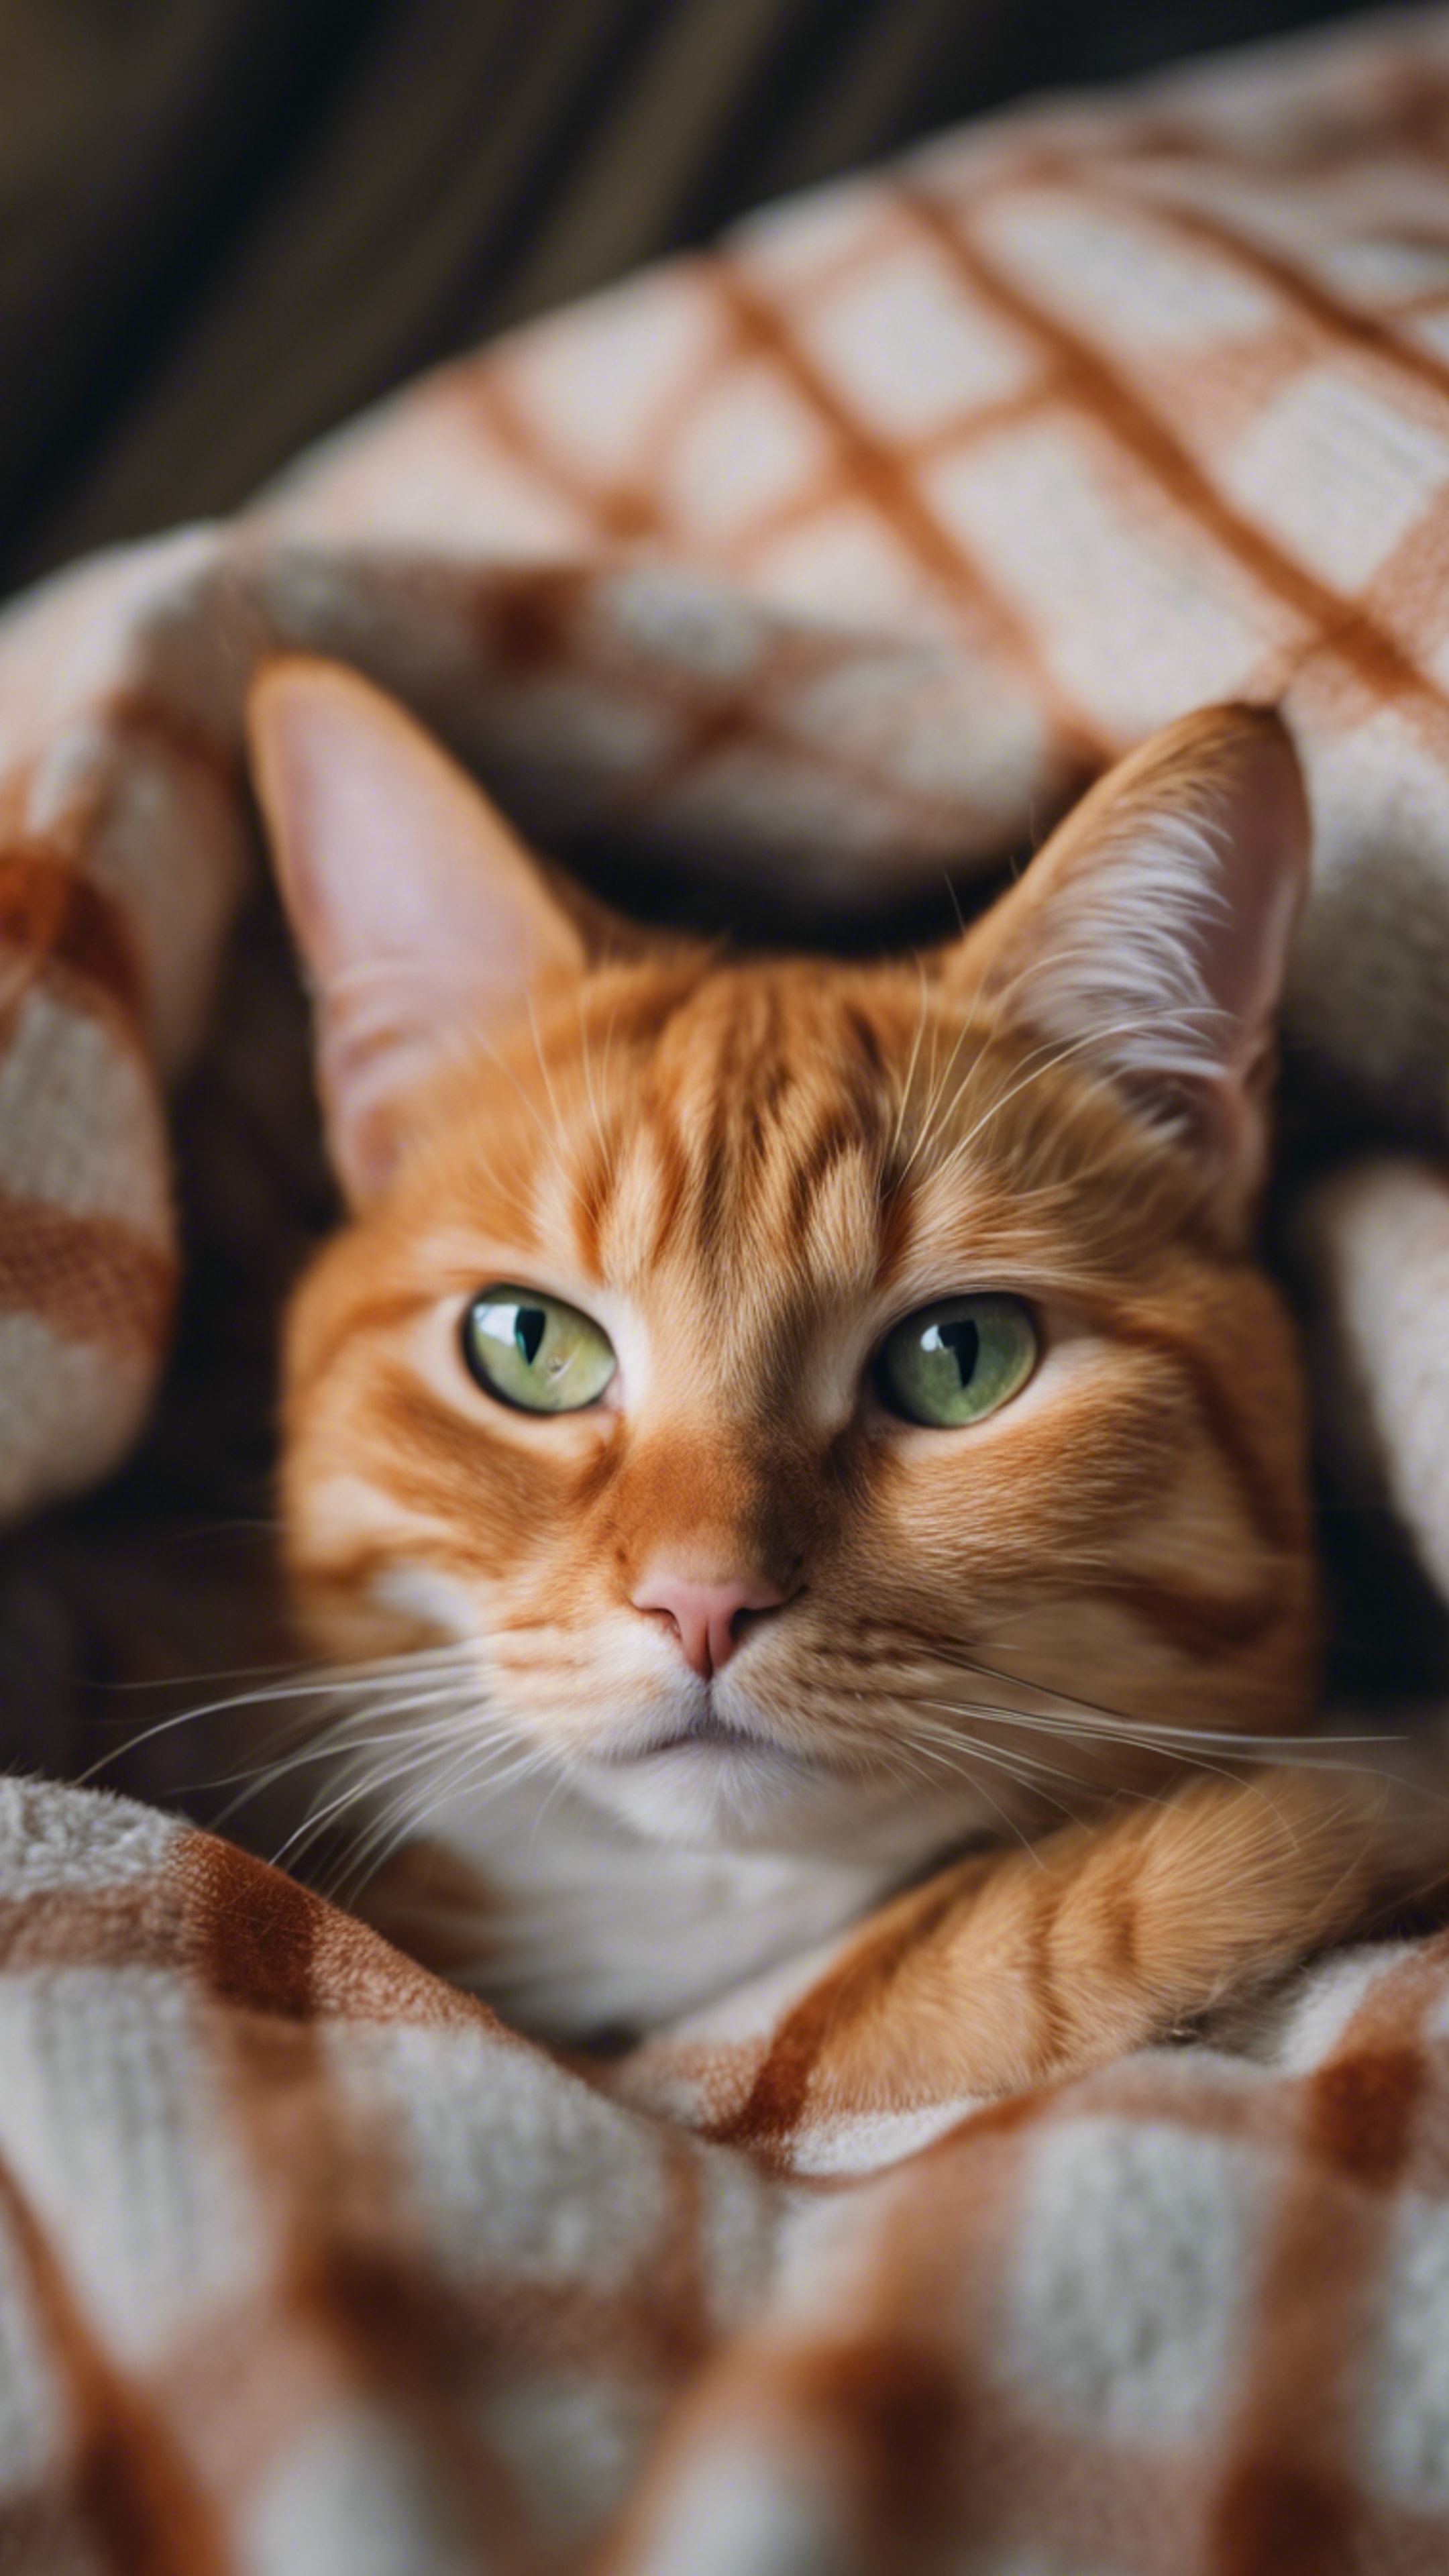 A close up of an orange tabby cat curled up on a cozy plaid blanket, purring gently, with a playful glint in its eyes. Fond d'écran[45e4538616504ff6a891]